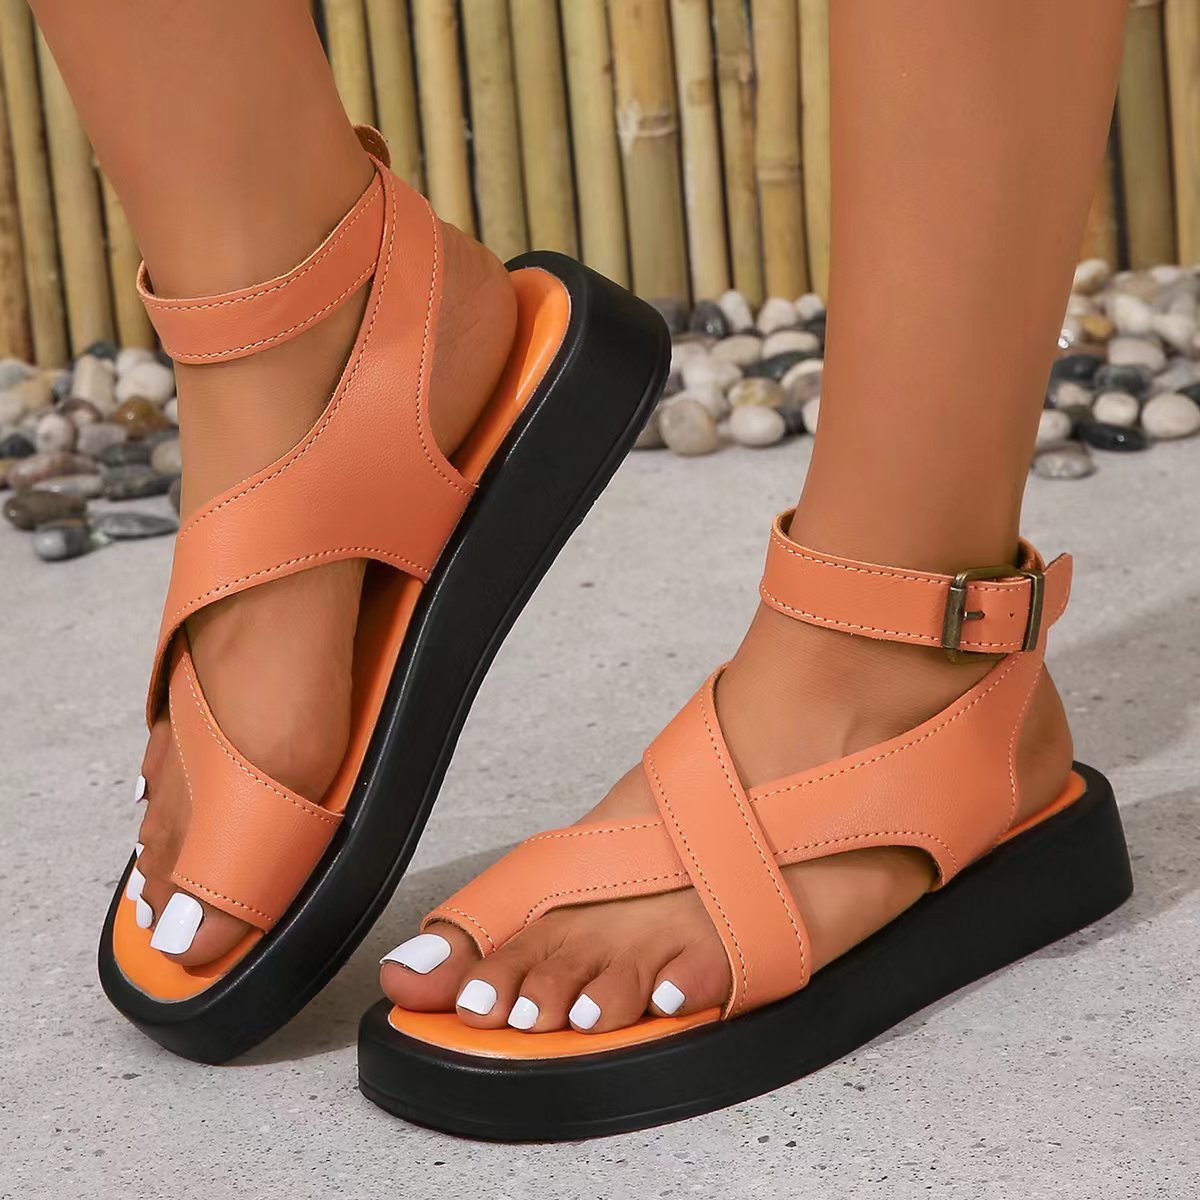 Casual Thick-Soled Clip Toe Sandals Summer Fashion Round Toe Beach Shoes With Back Buckle Strap Sandal For Women